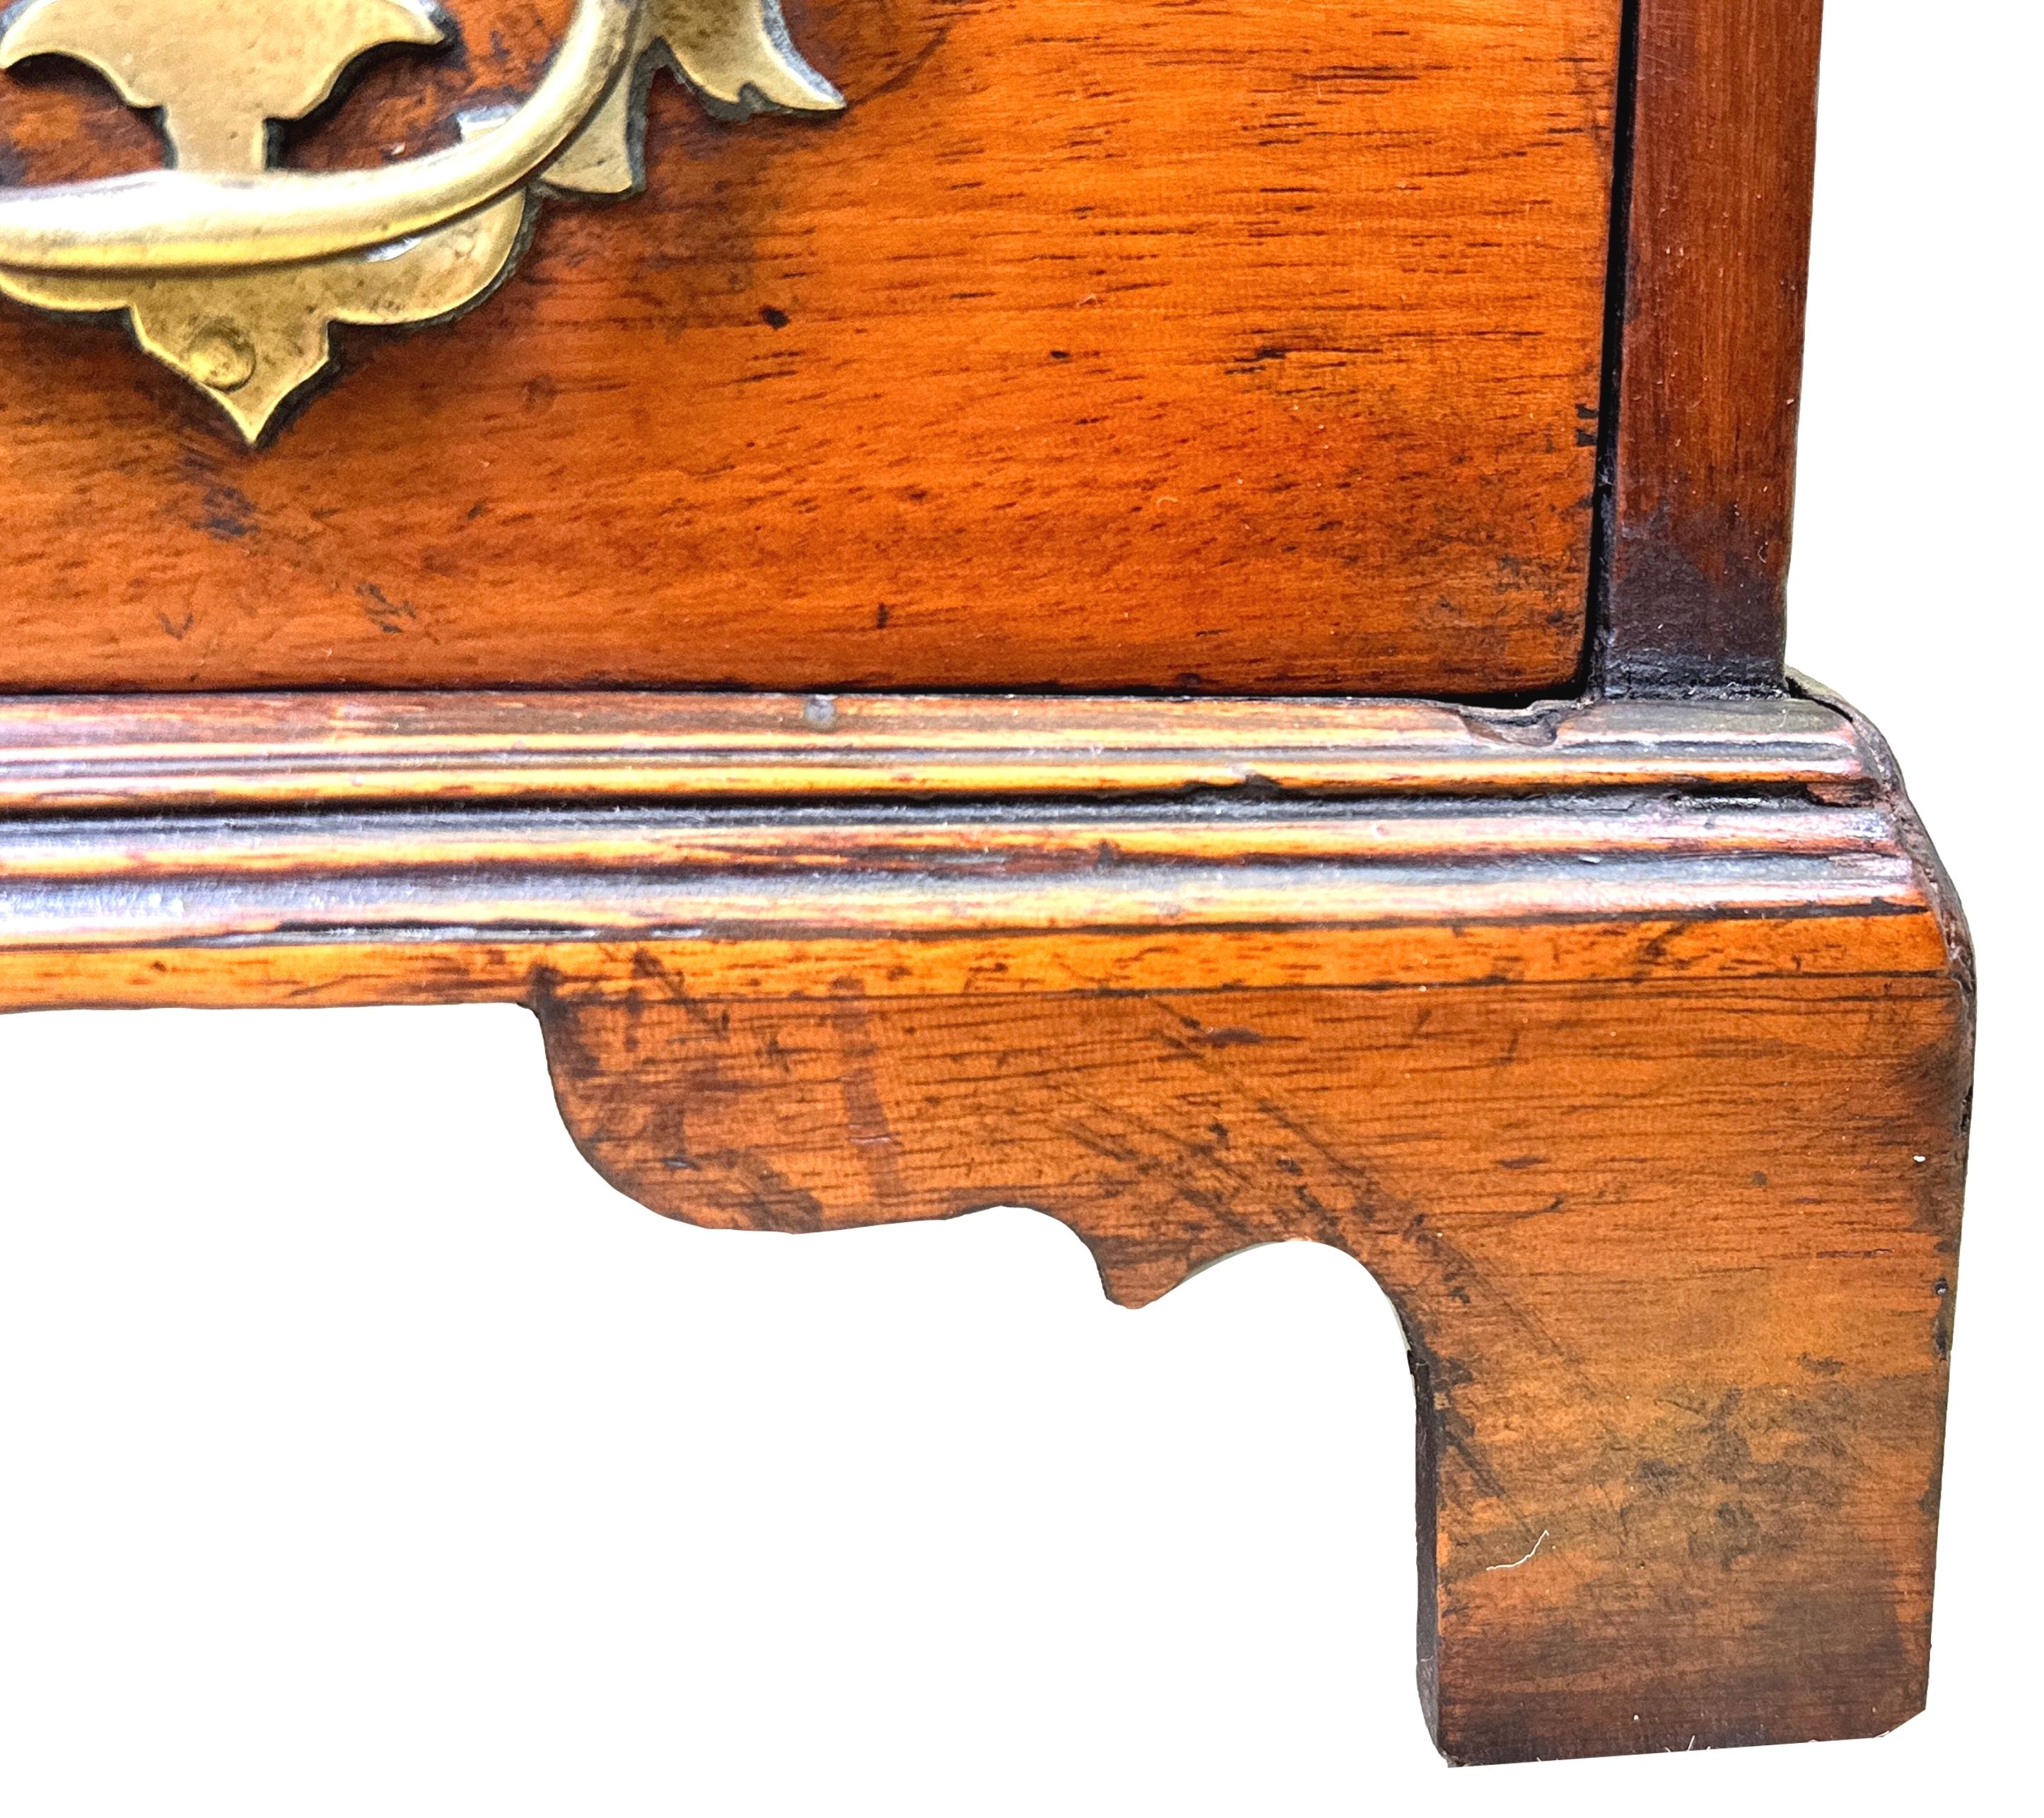 Rare 18th Century Georgian Mahogany Miniature Chest In Good Condition For Sale In Bedfordshire, GB